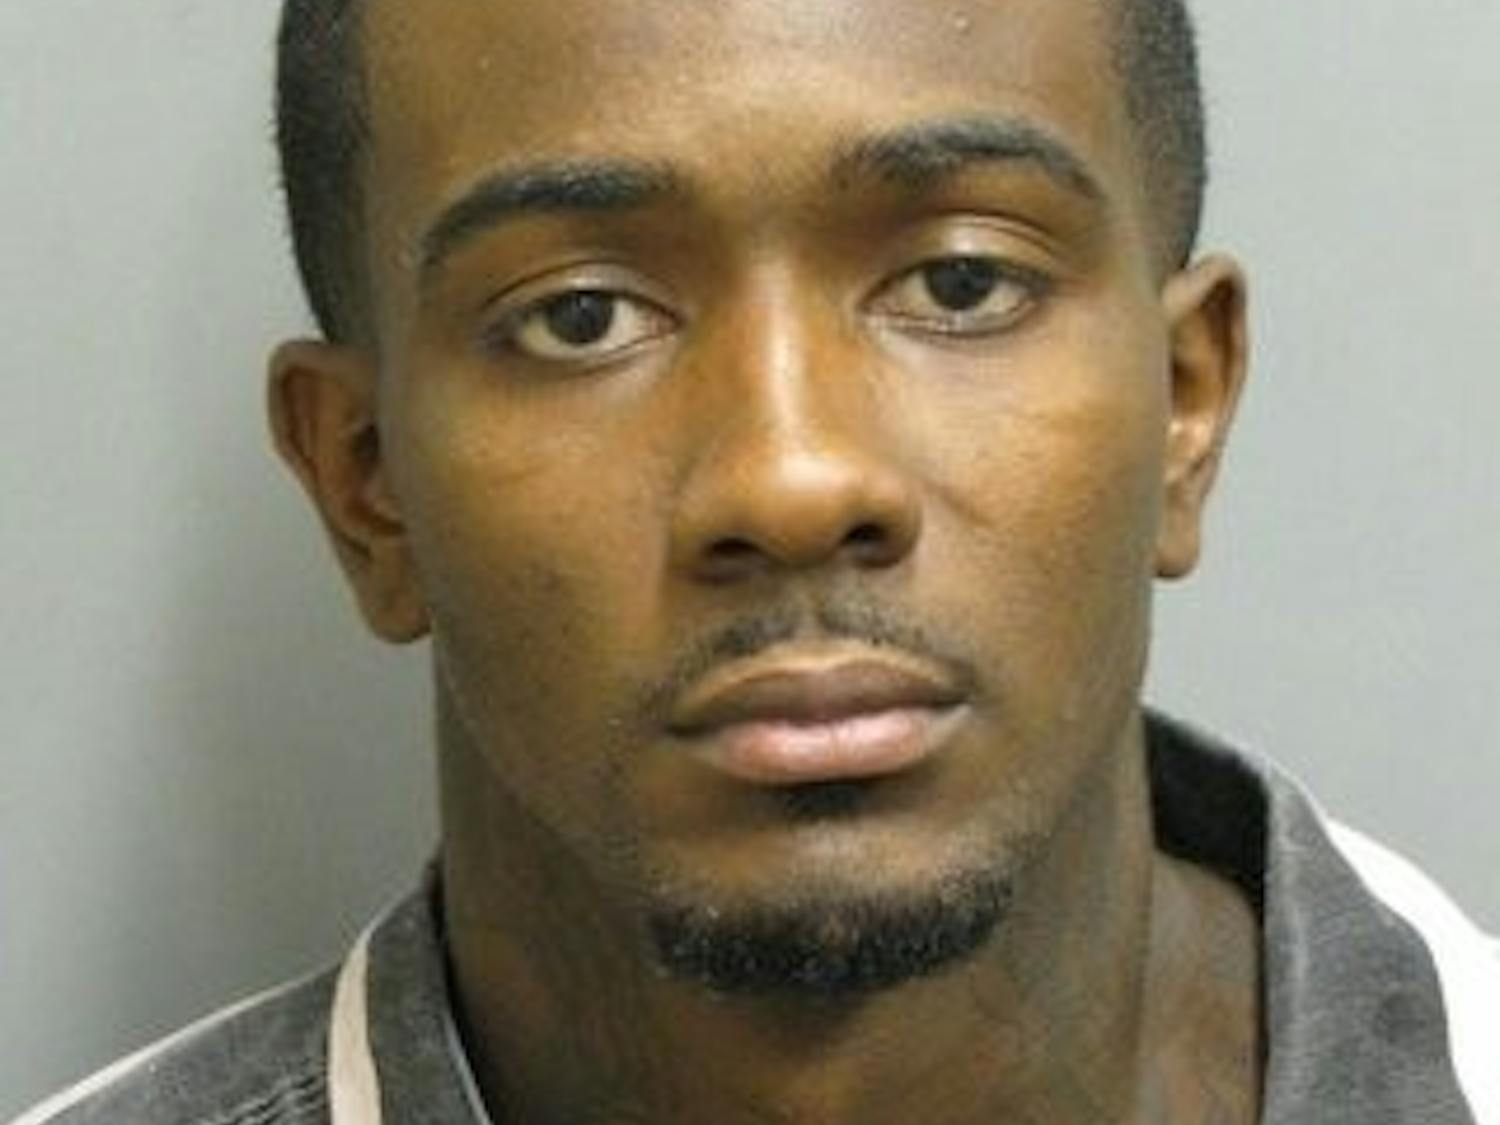 Desmonte Leonard turned himself in to authorities last night at 7:57 p.m. to Montgomery officials.